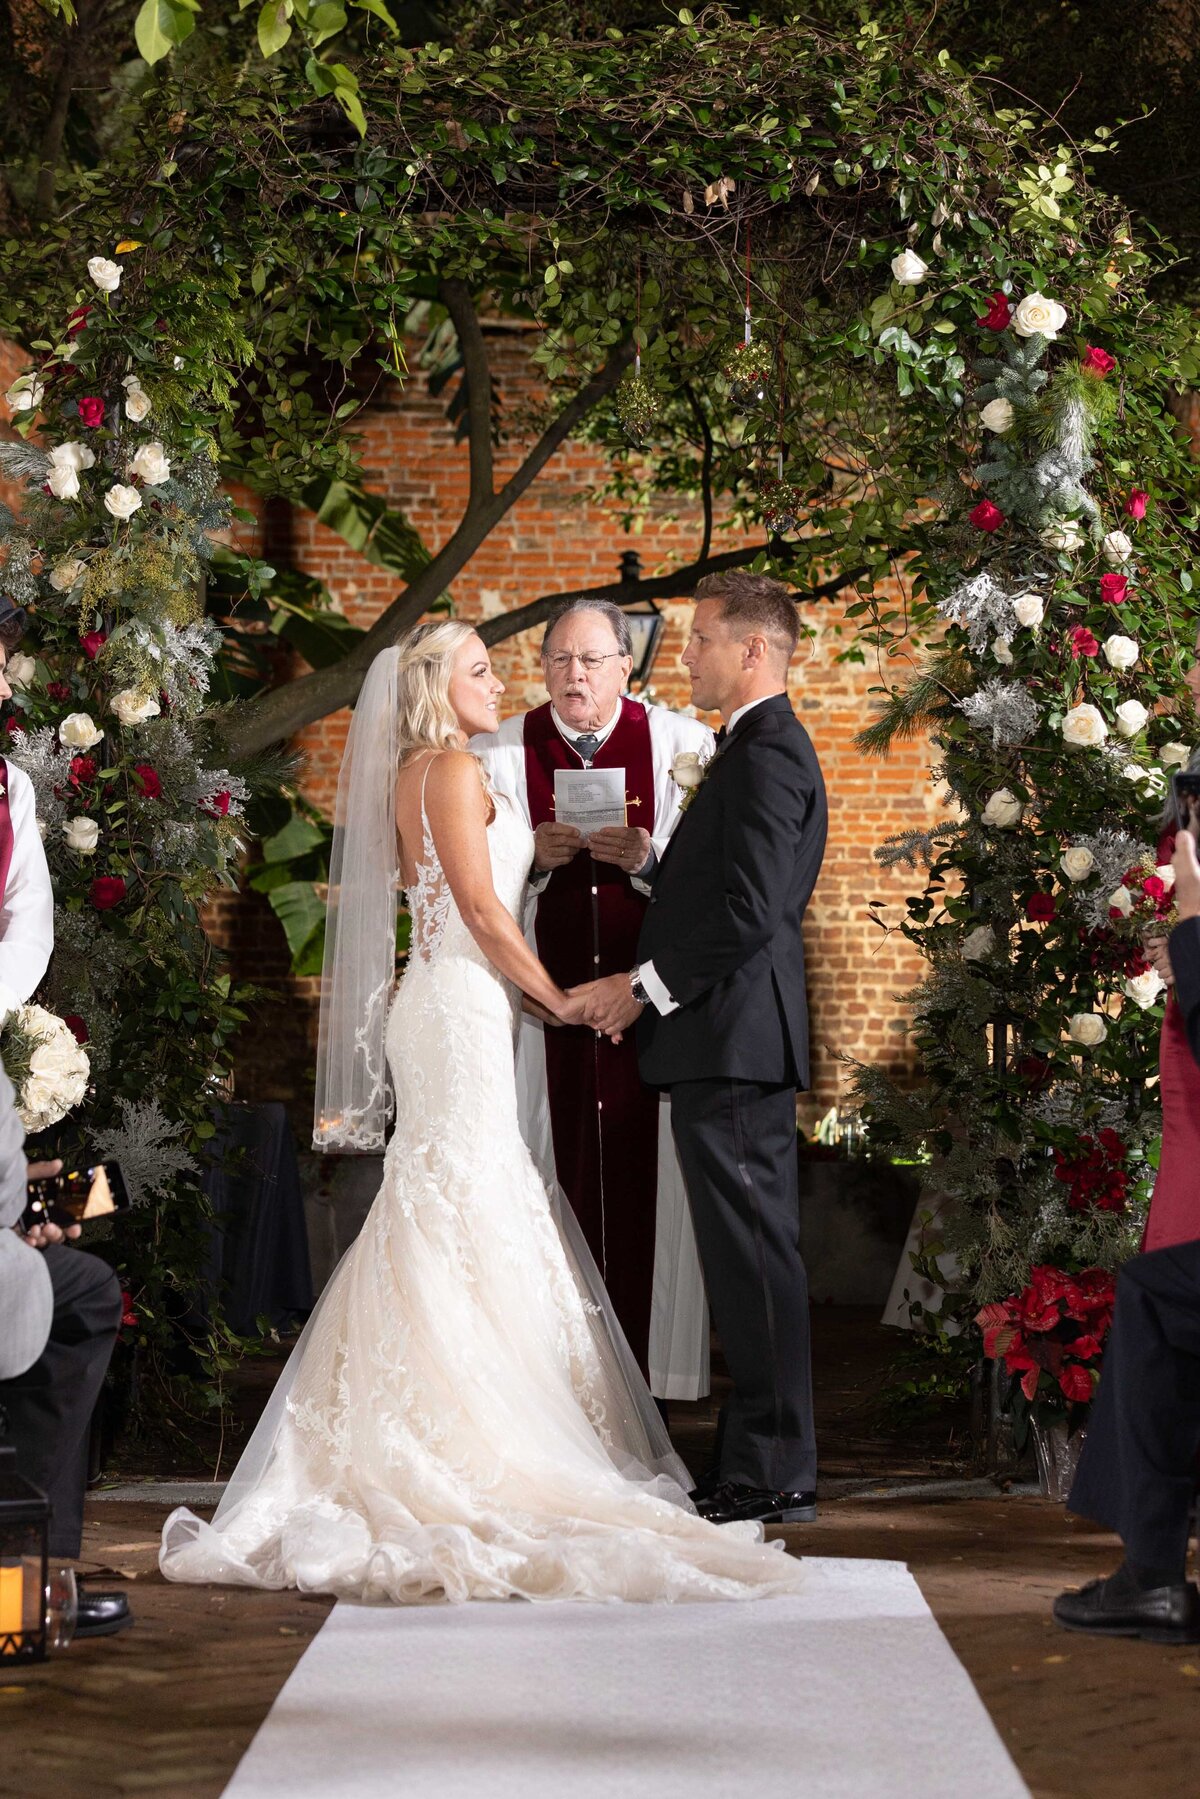 The couple exchanges vows during the wedding ceremony in the courtyard of the Pharmacy Museum in New Orleans, Louisiana.